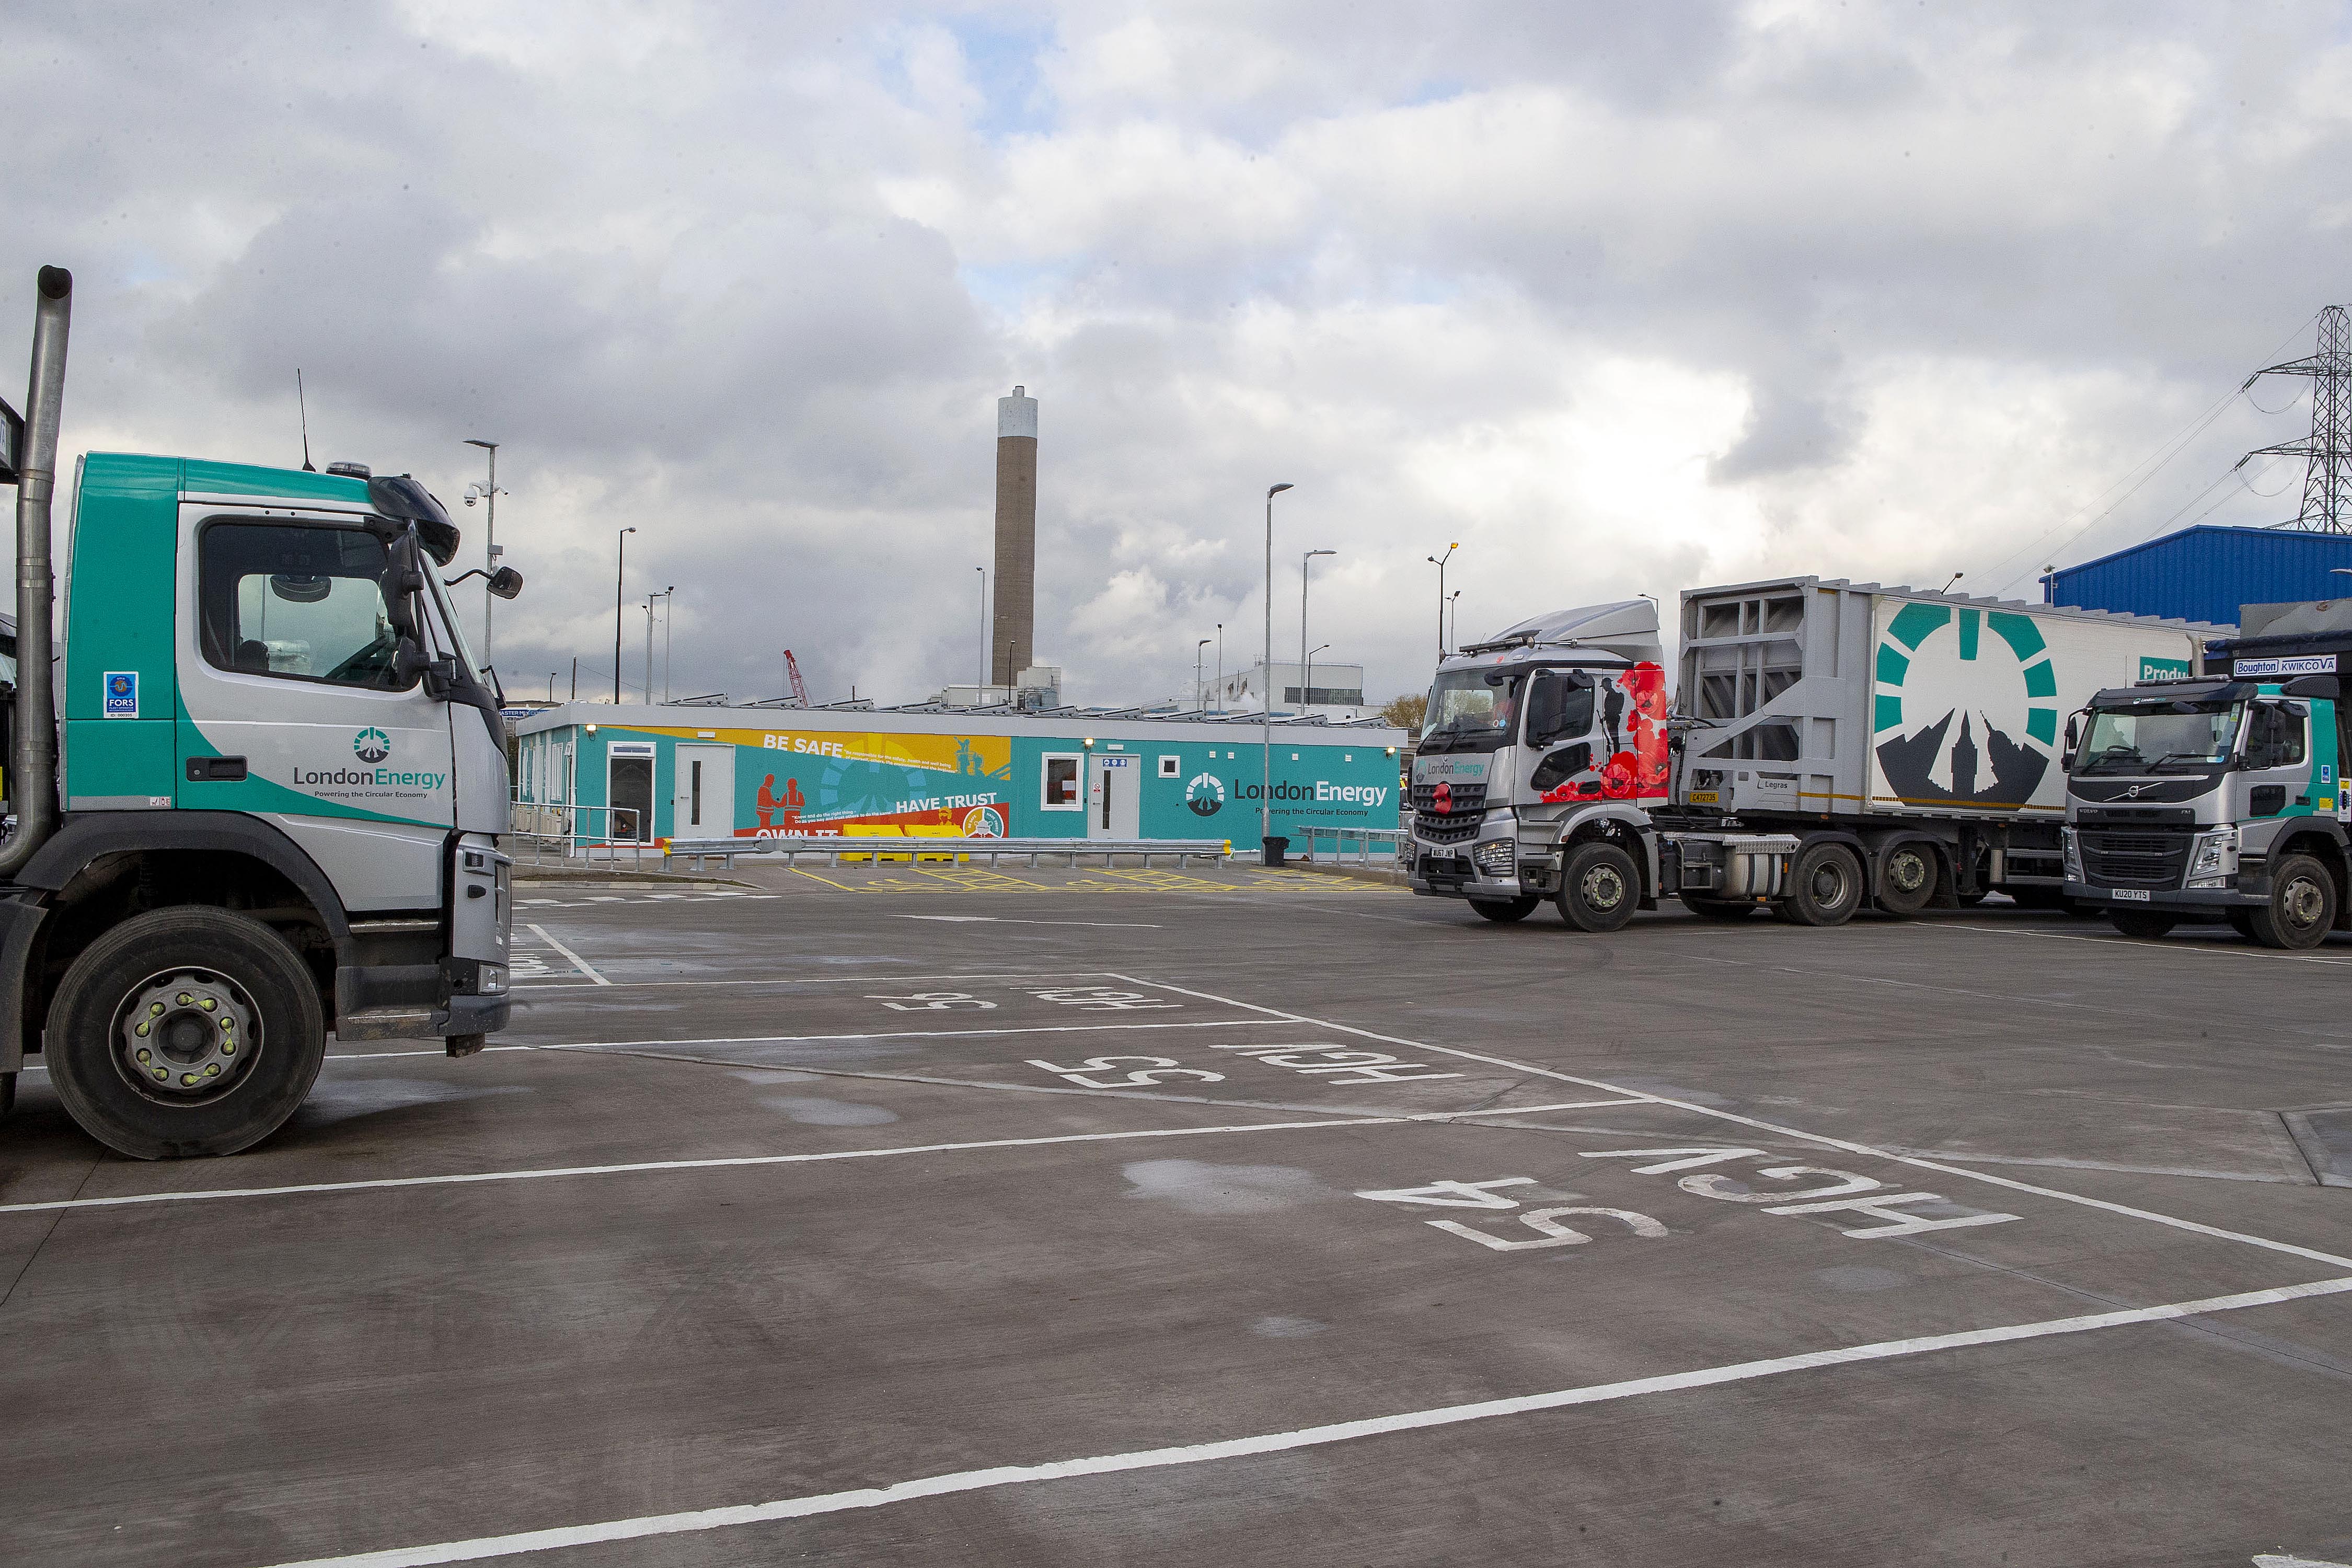 LondonEnergy’s new Transport Yard at Hawley Road with view of the new office and welfare facilities